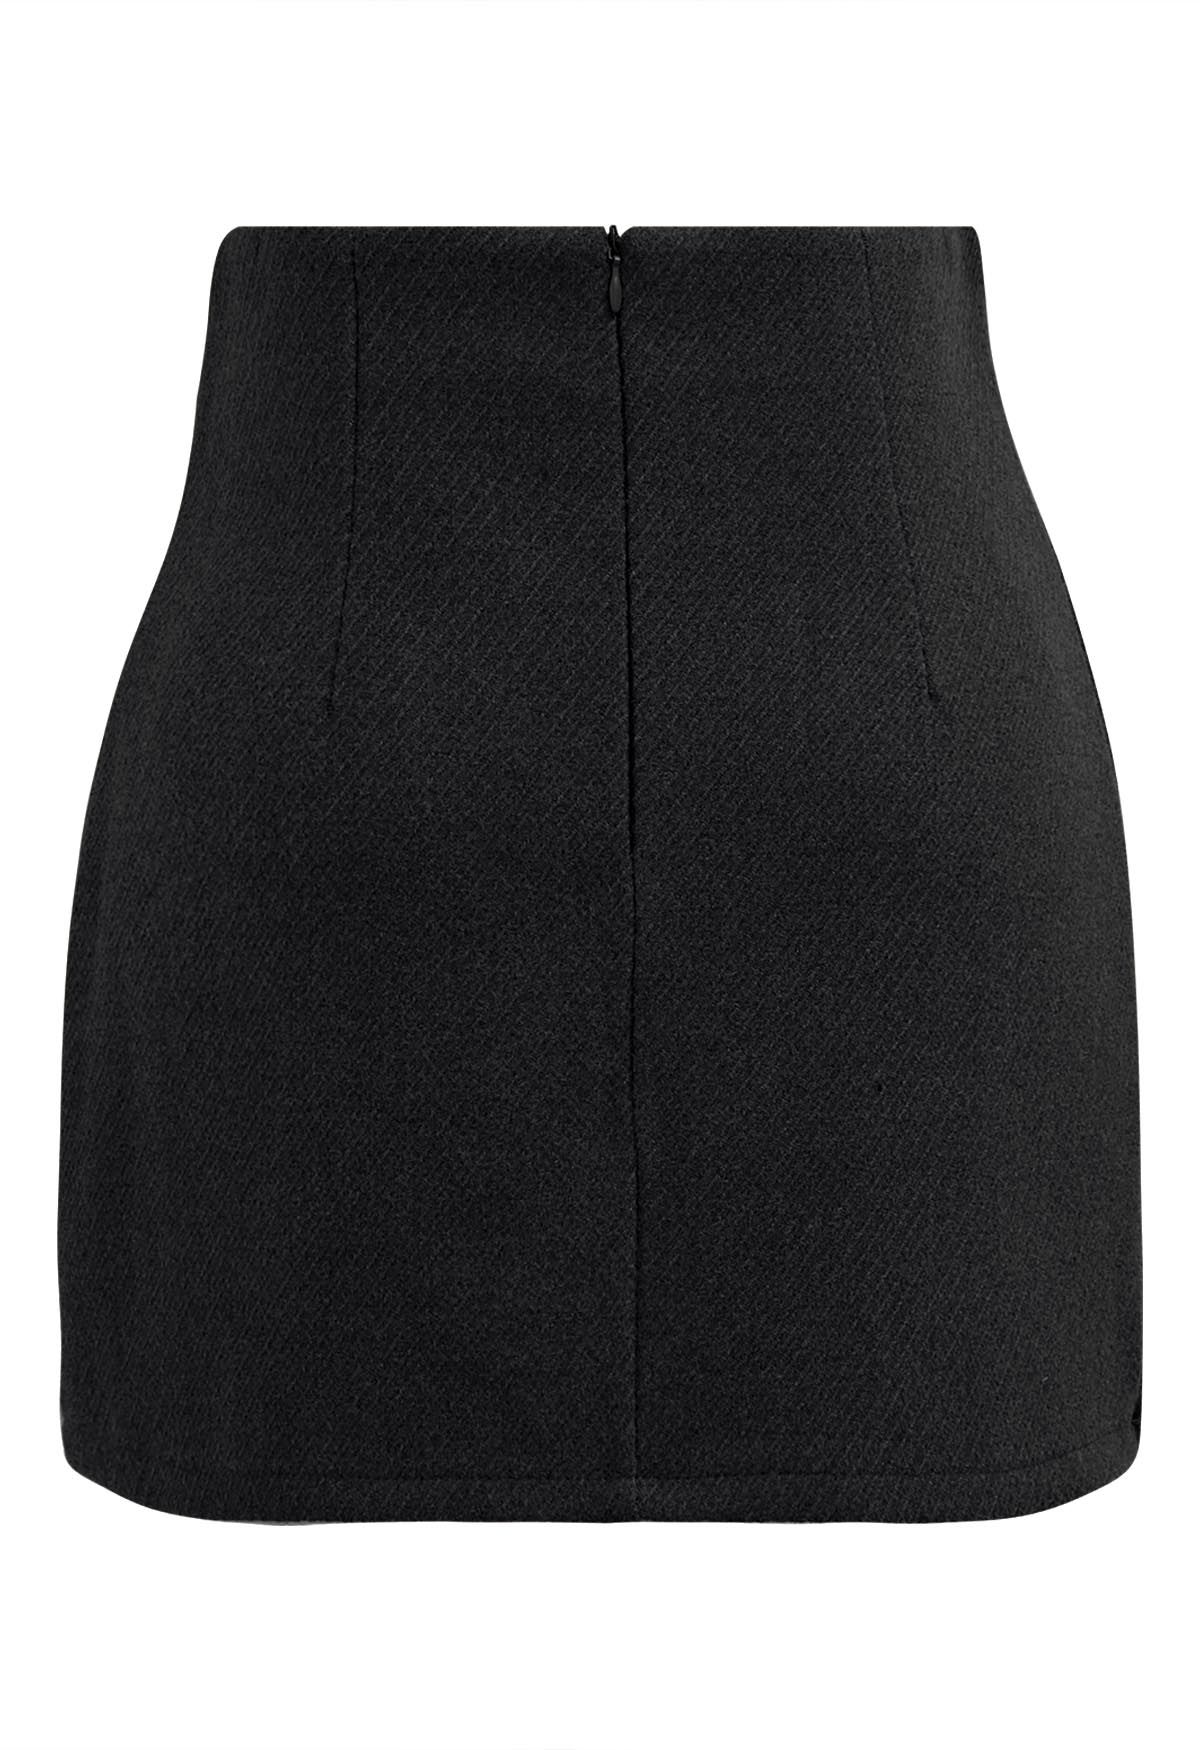 Notched Hem Wool-Blend Flap Mini Skirt in Black - Retro, Indie and ...